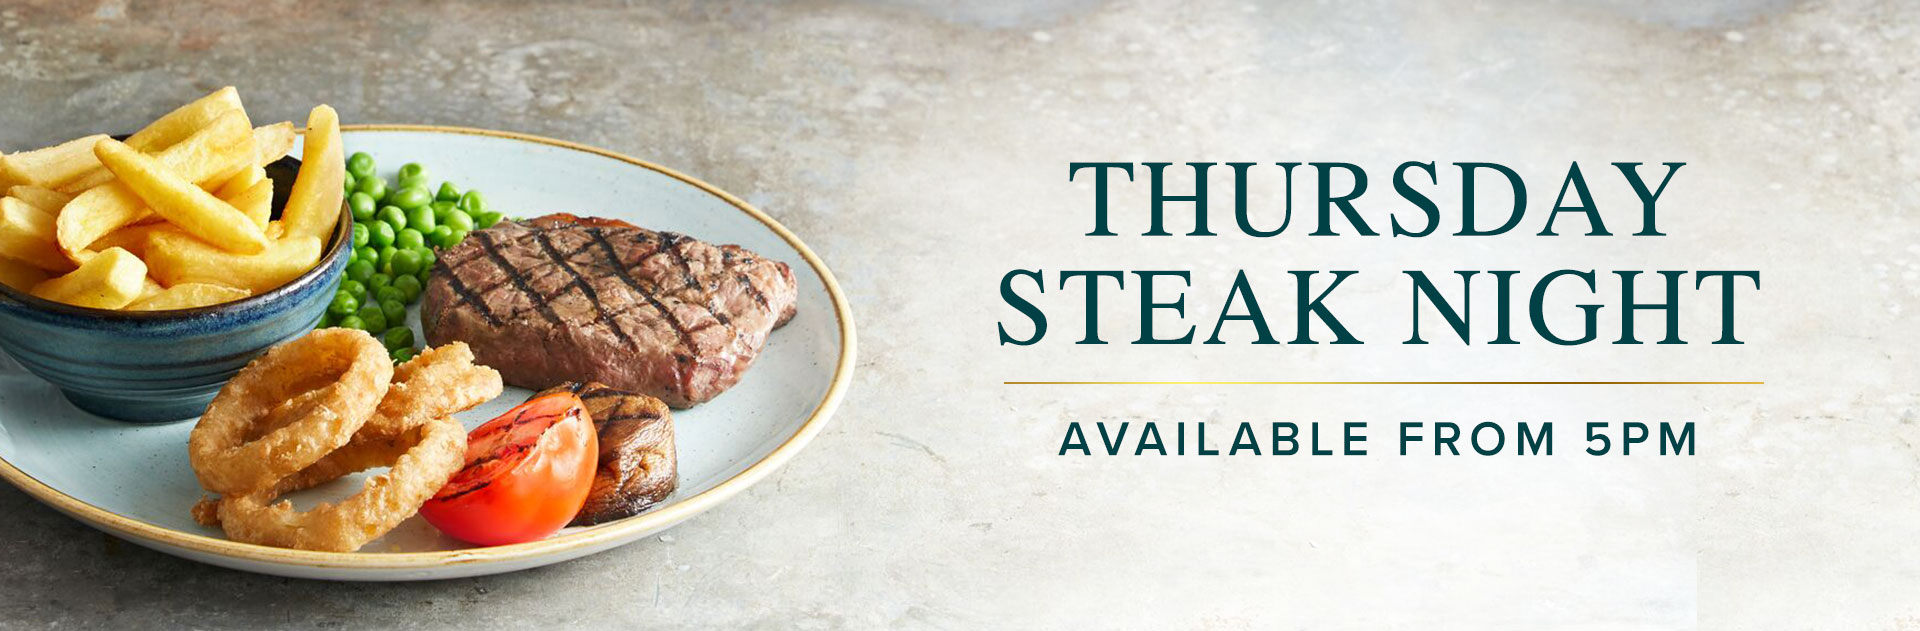 Thursday Steak Night at The Three Stags